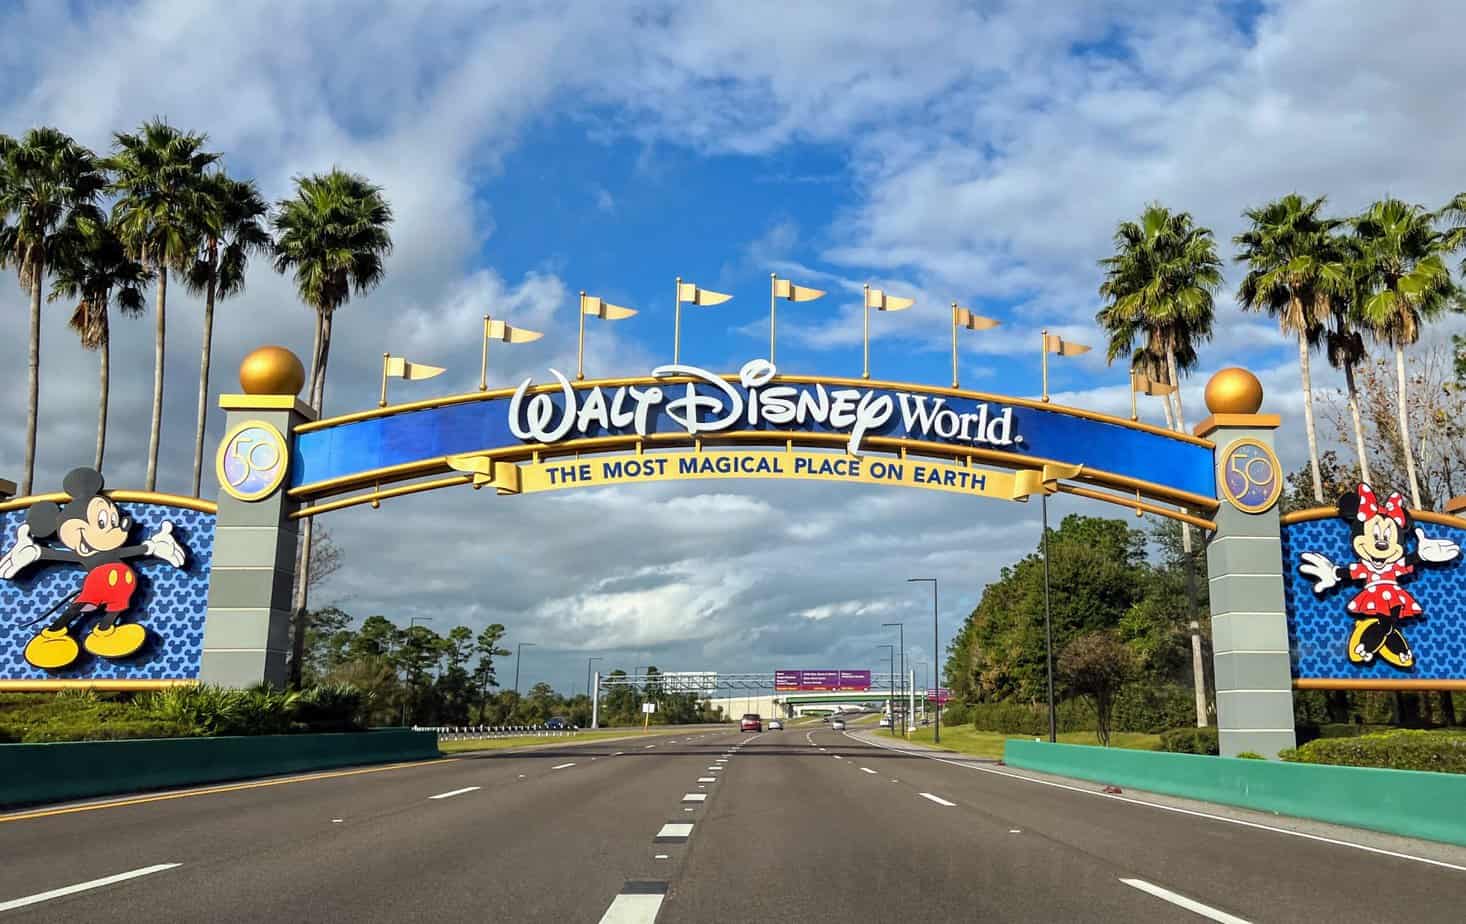 Walt Disney World Annual Passes go on sale in 2023. Walt Disney World entrance sign- the most magical place on earth.